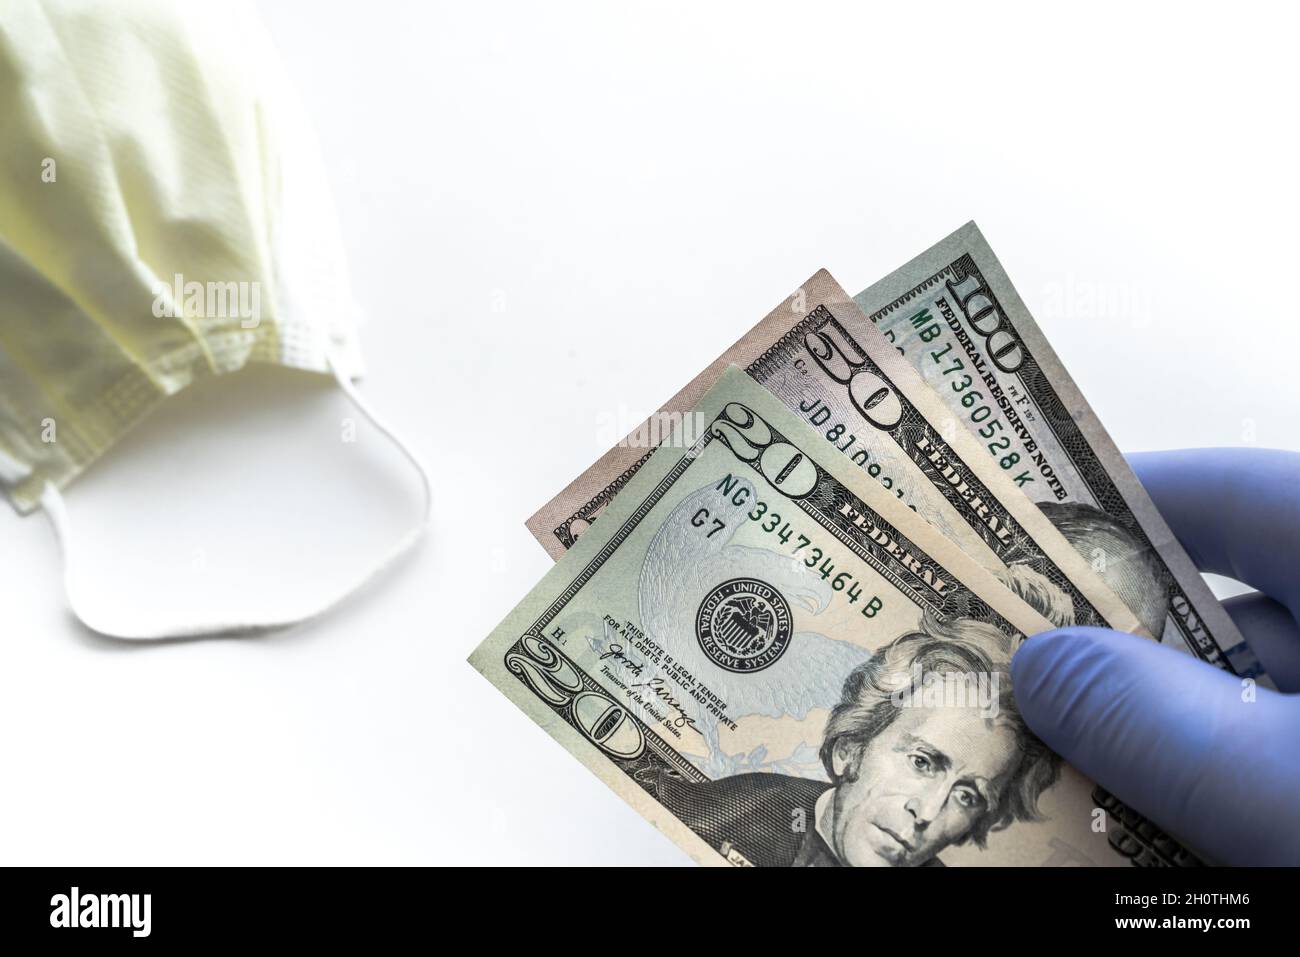 Close up of person wearing a blue latex glove holding a hundred, fifty and twenty dollar bill fanned out and isolated with a yellow face mask or cover Stock Photo